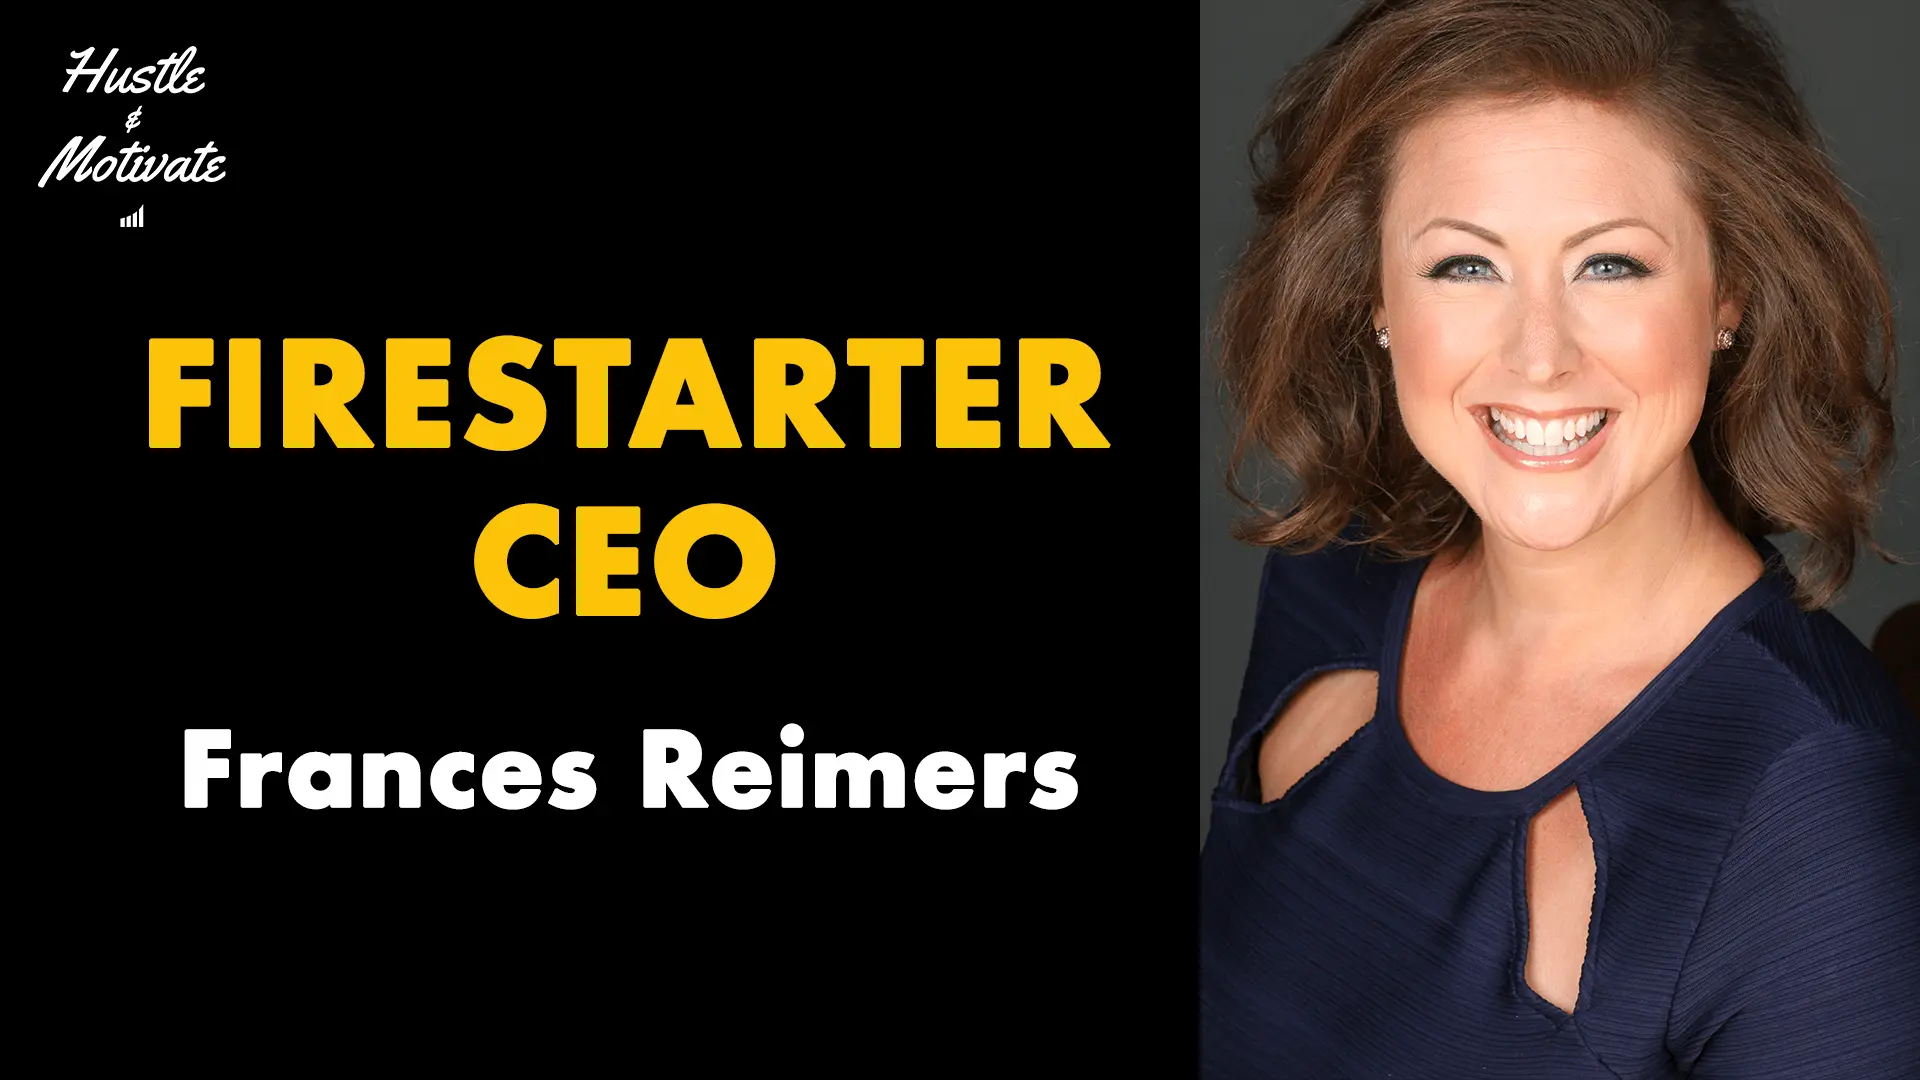 Frances Reimers interview on Hustle & Motivate, a podcast presented by Joker Mag, the home of the underdog.